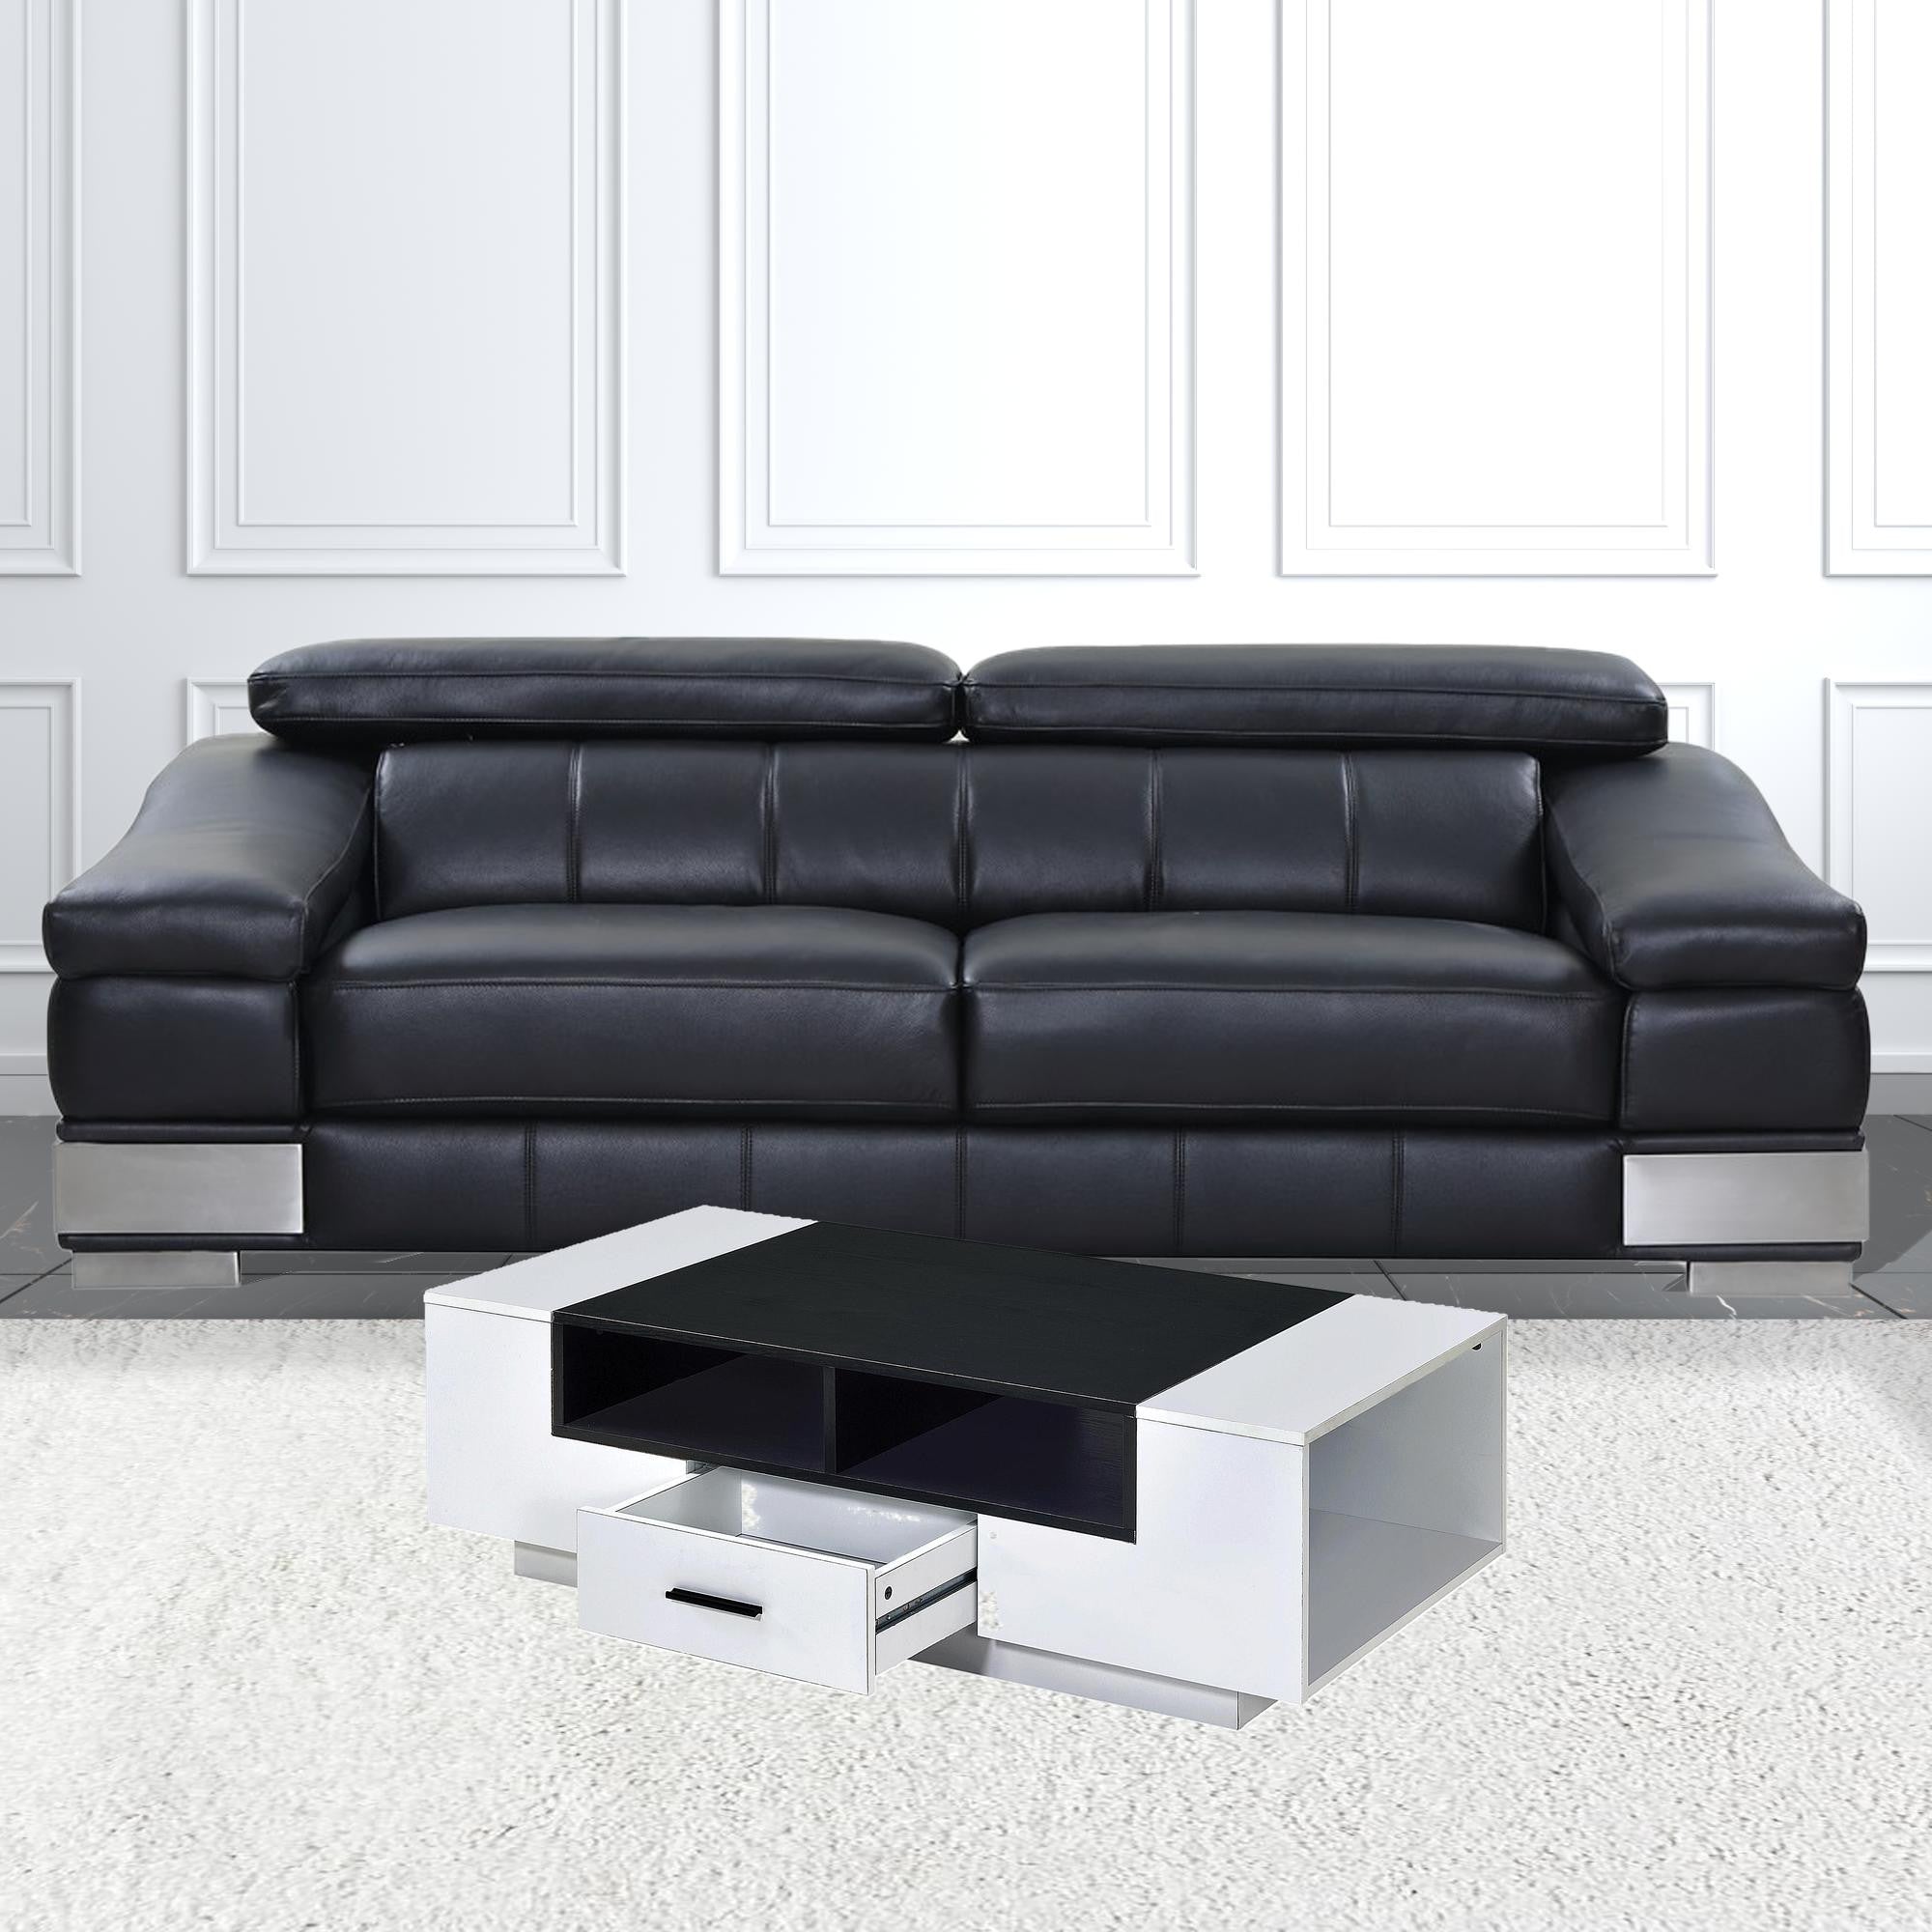 47" White And Black Rectangular Coffee Table With Drawer And Three Shelves